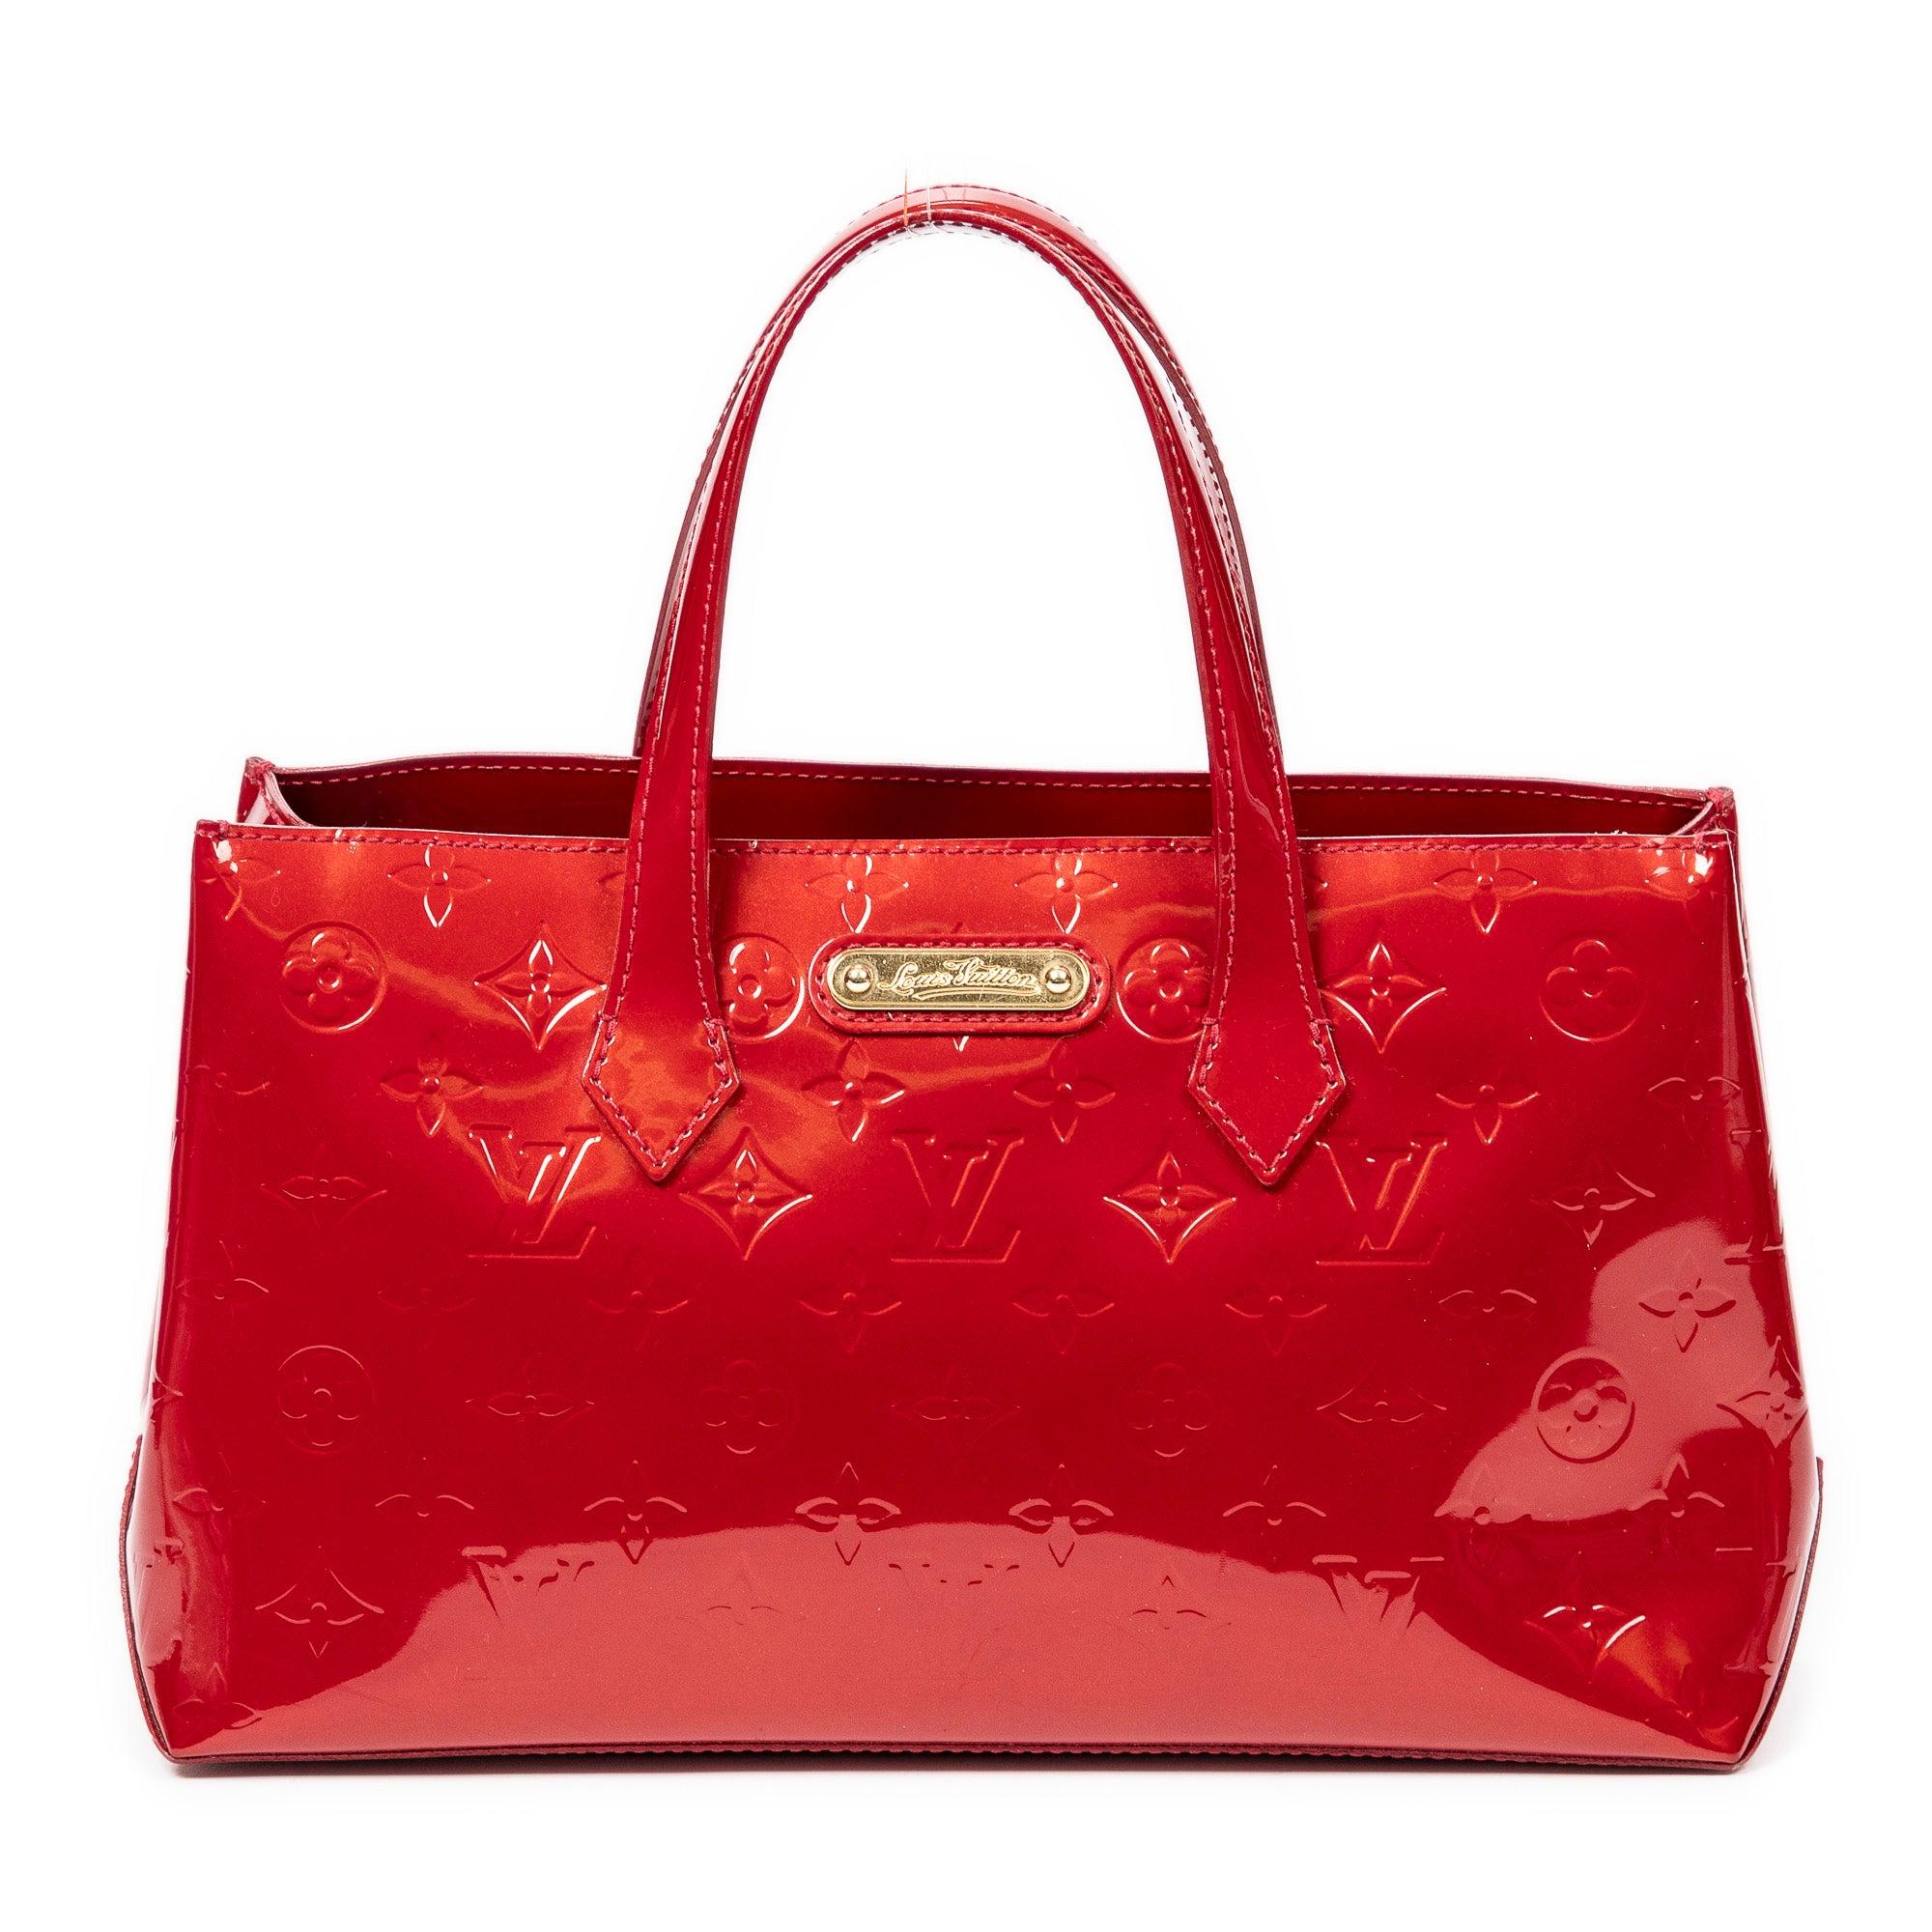 Louis Vuitton Wilshire Pm in Red